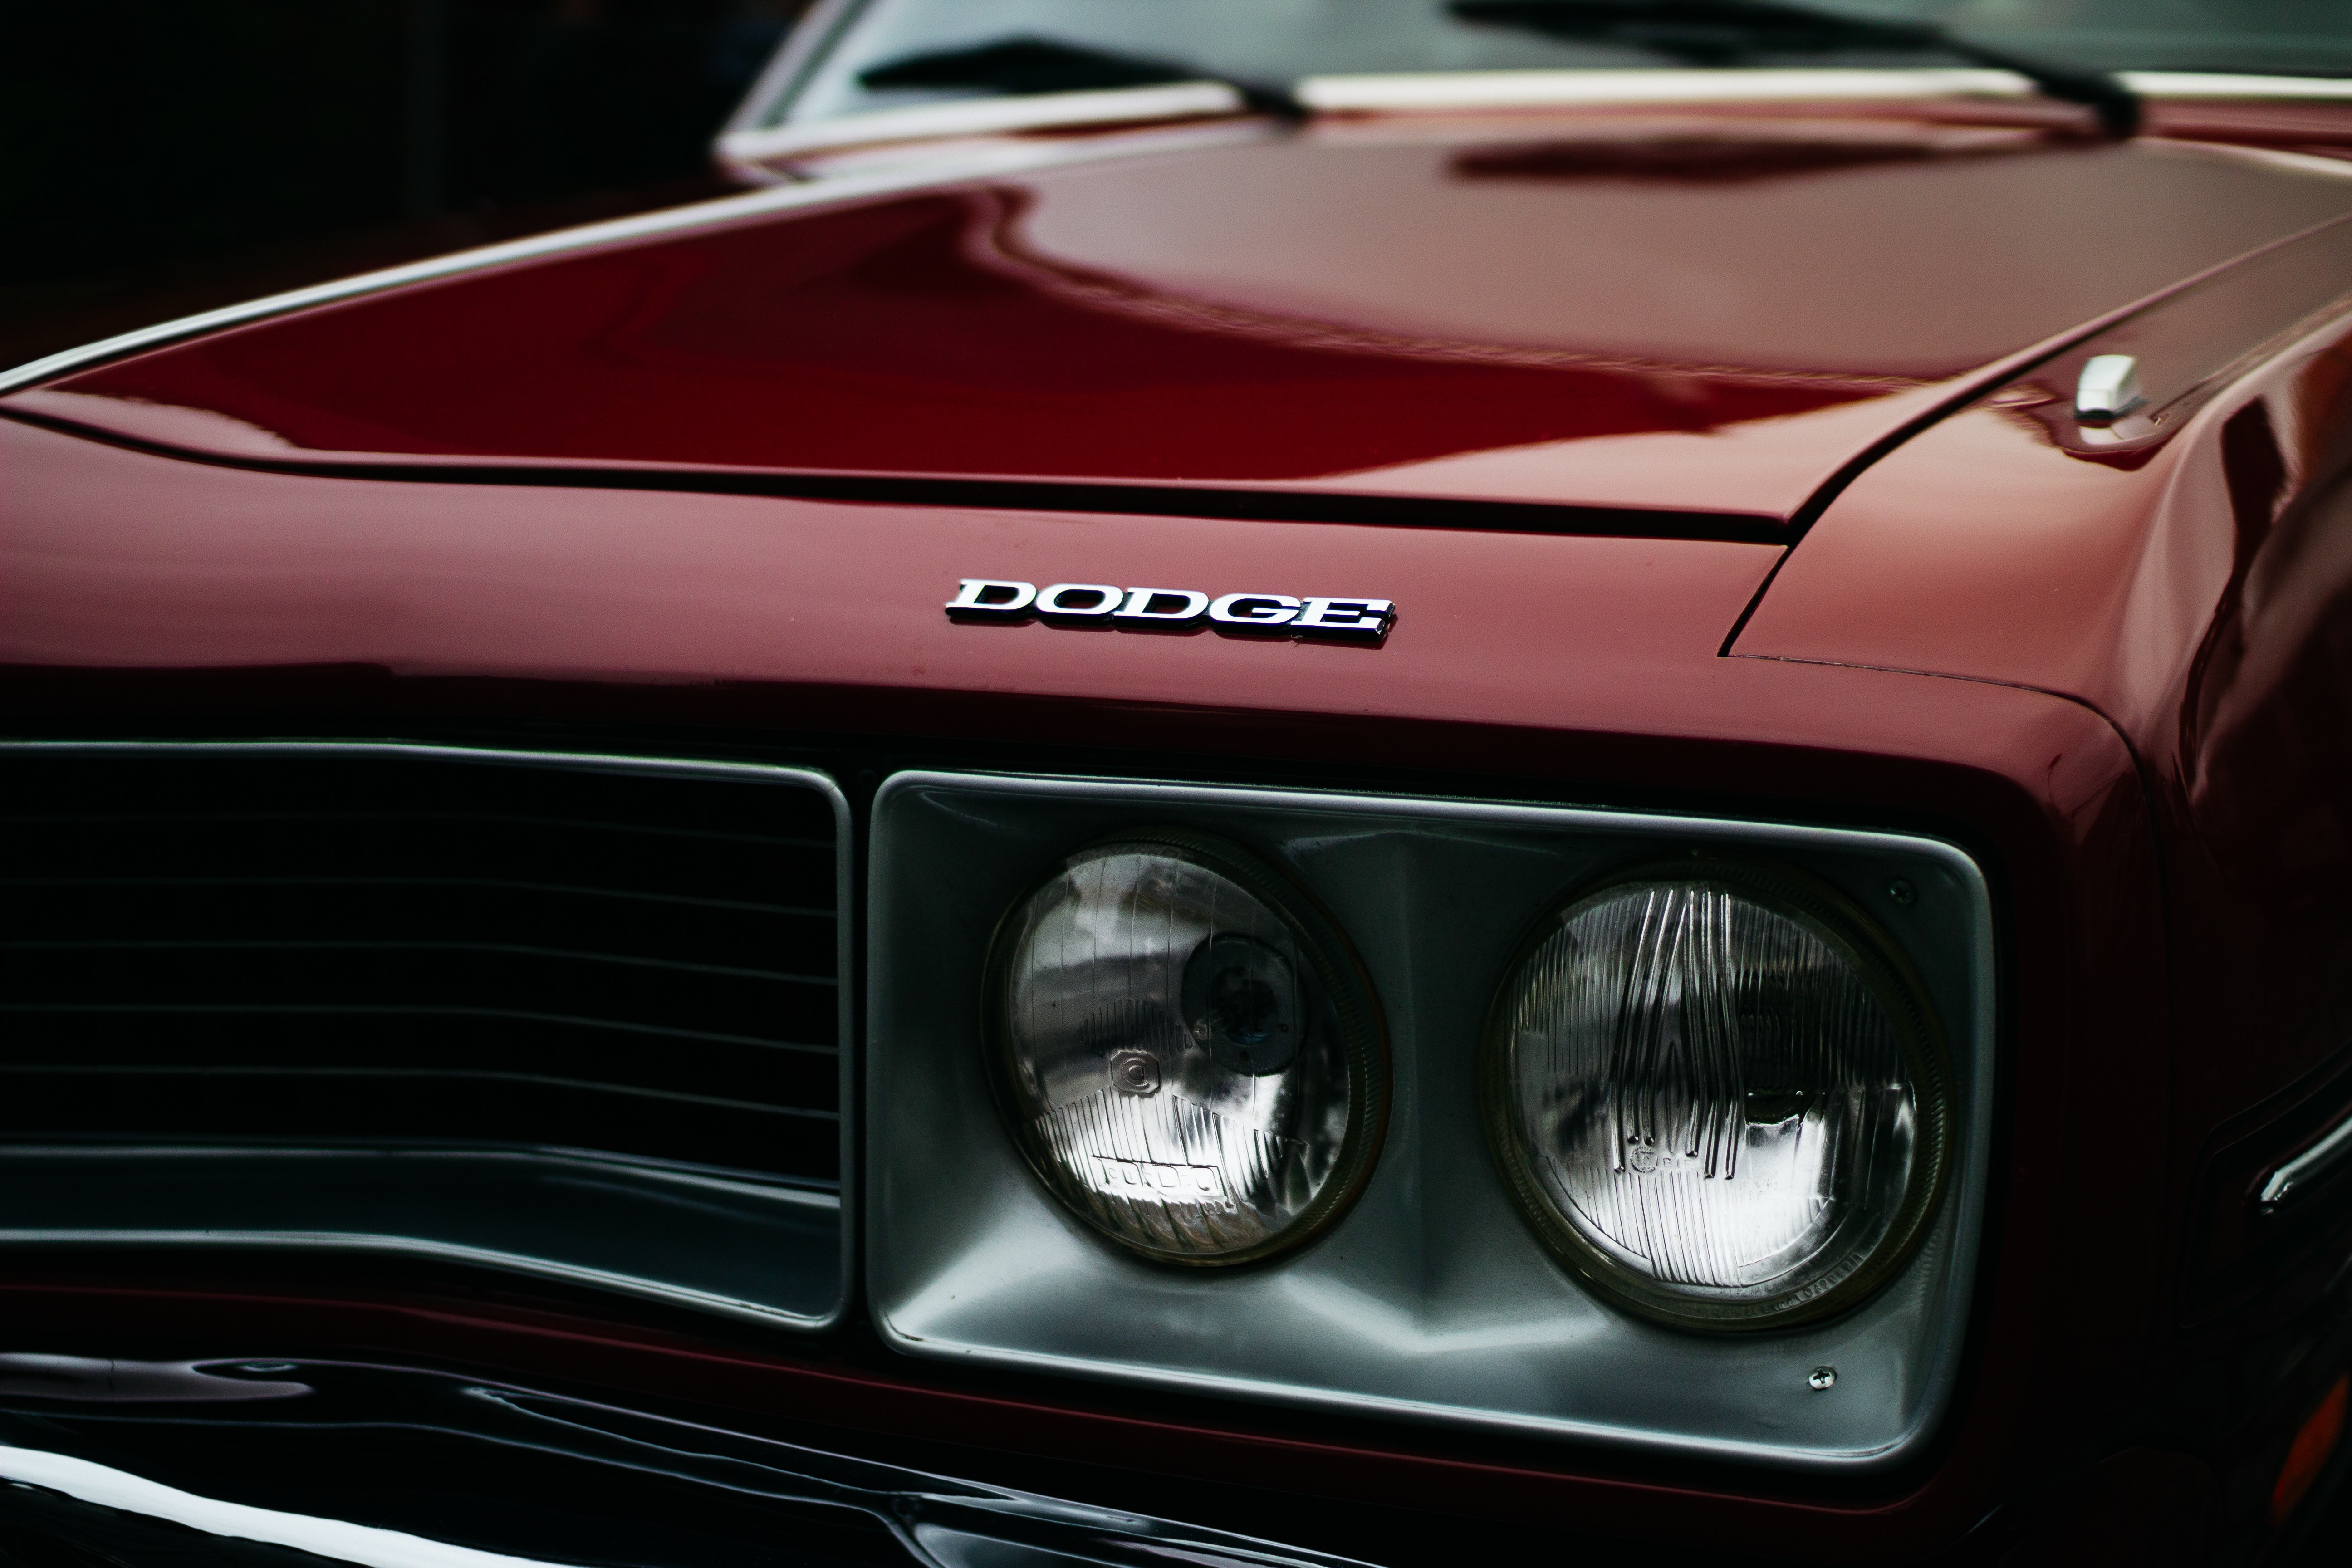 Classic Muscle Car Wallpapers